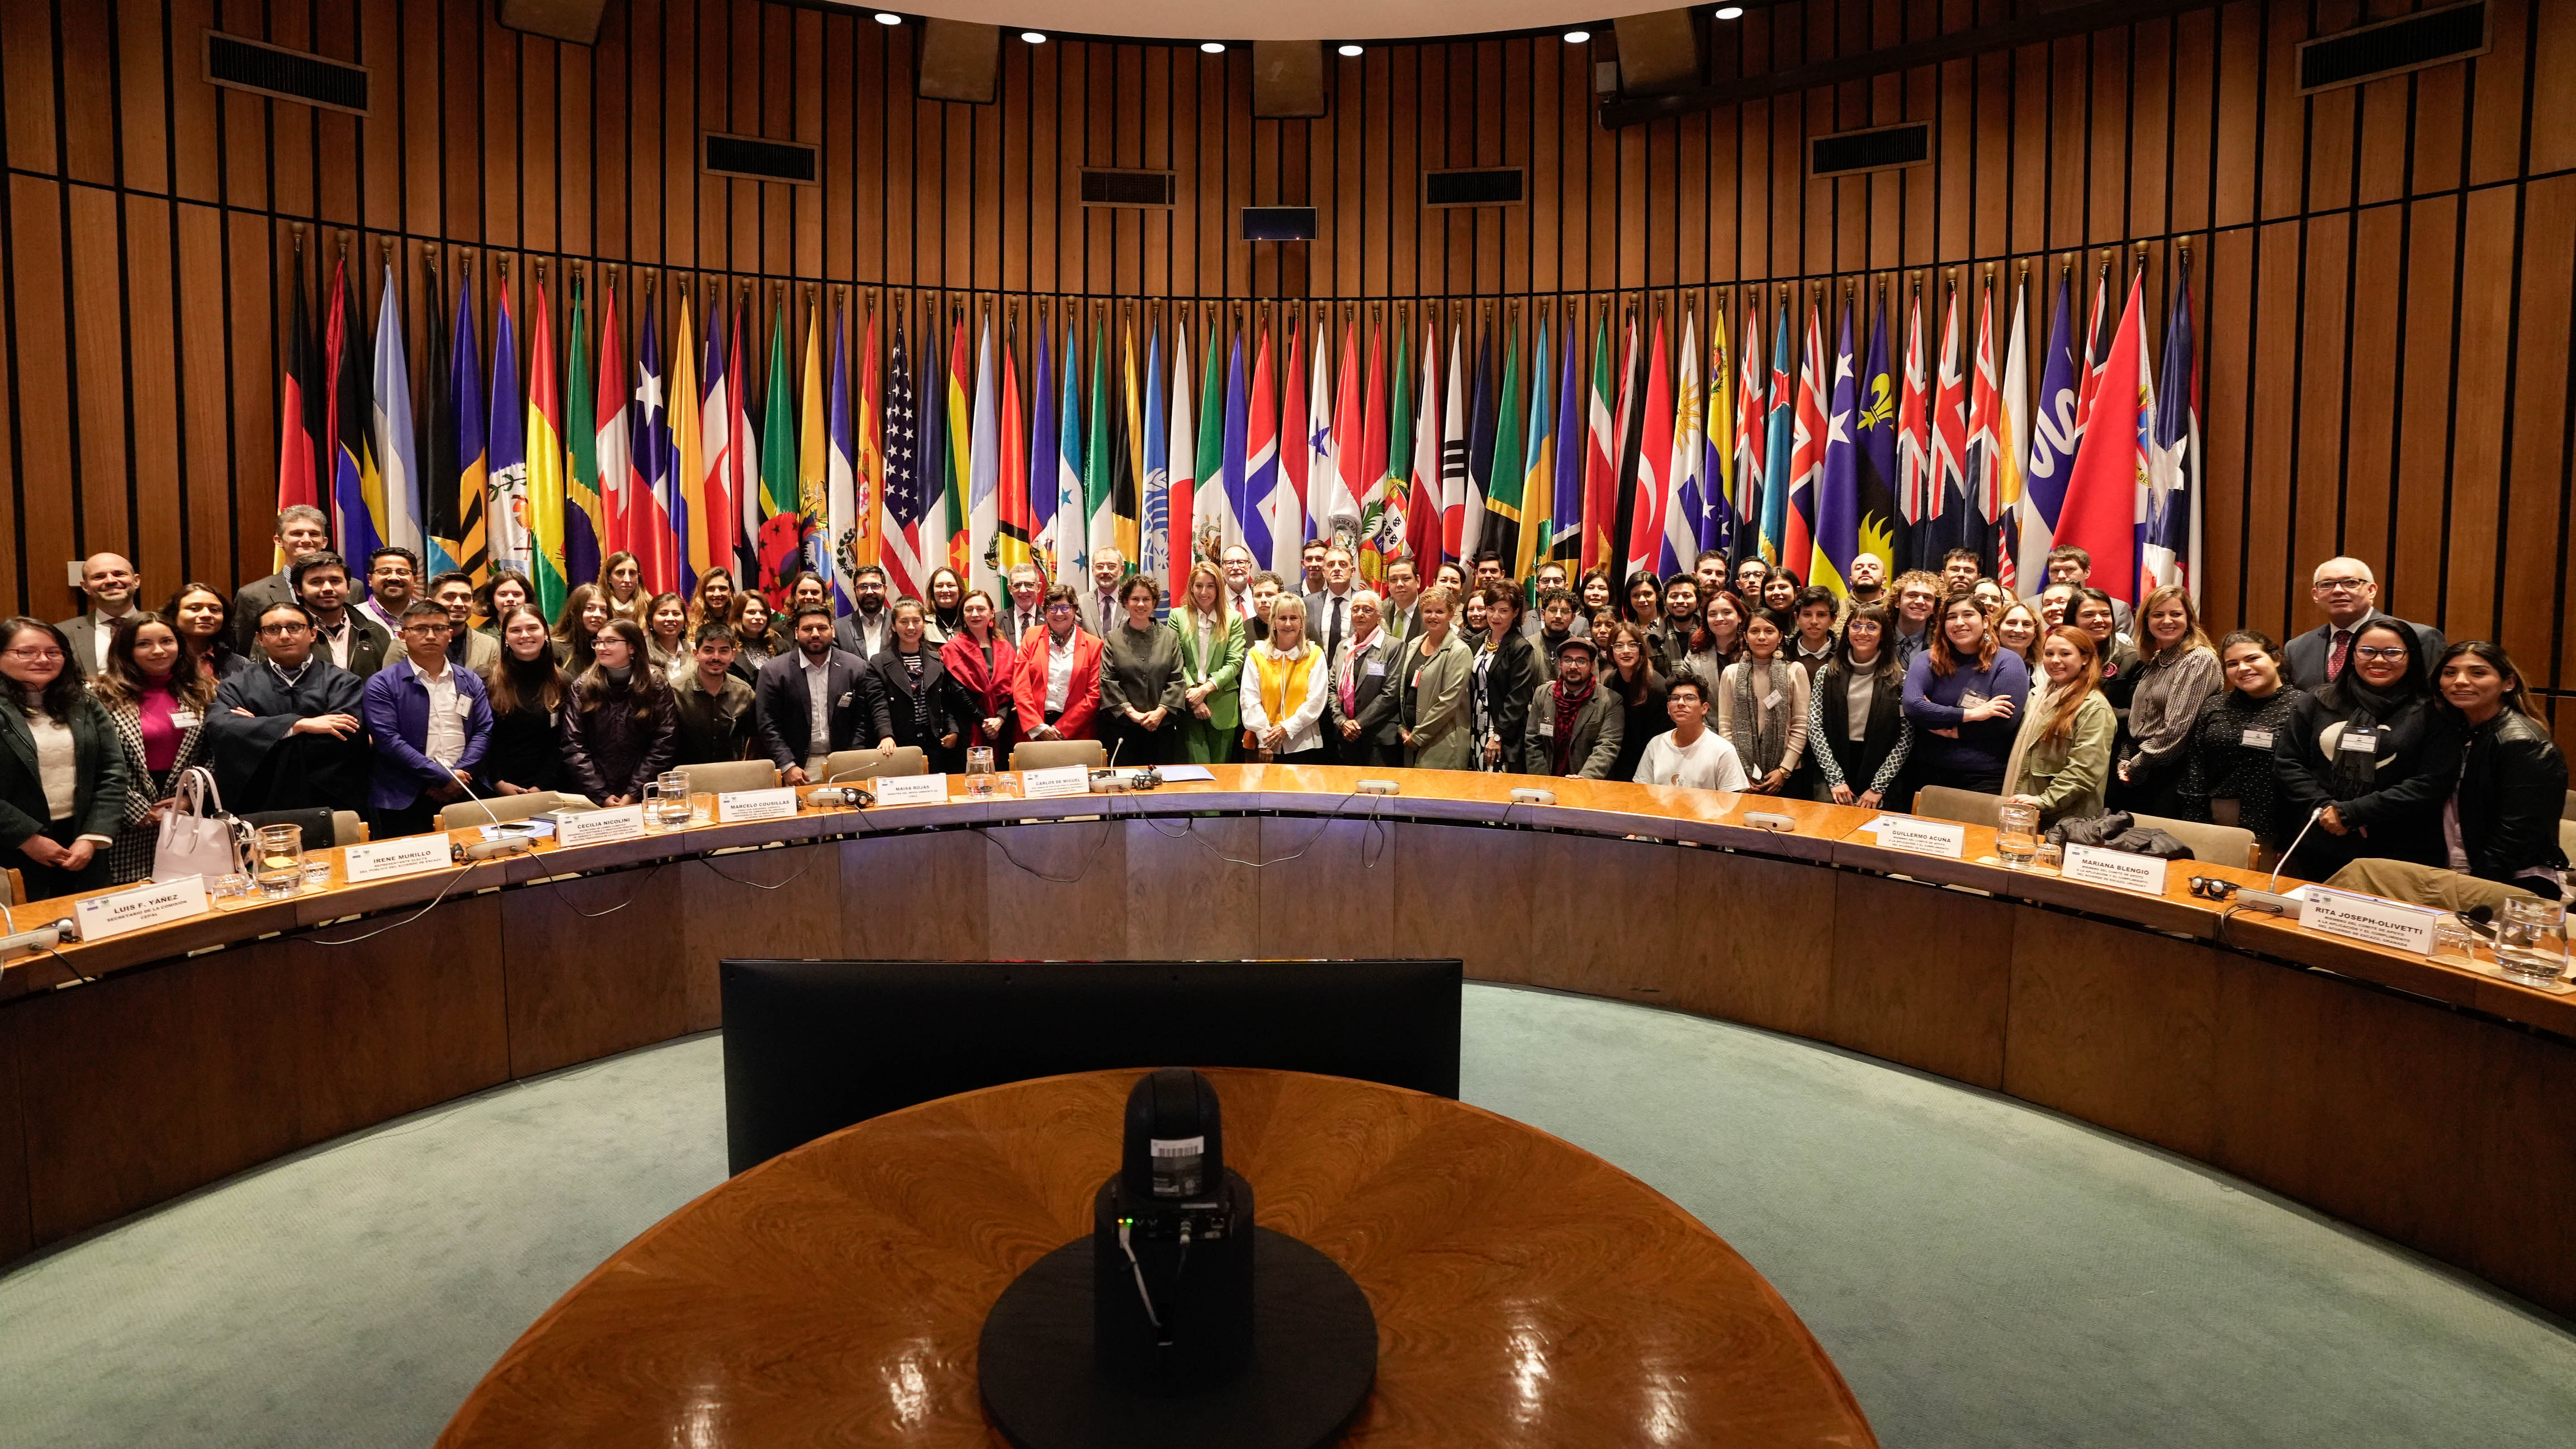 Group photo of the Meeting of the Committee to Support Implementation and Compliance of the Escazú Agreement